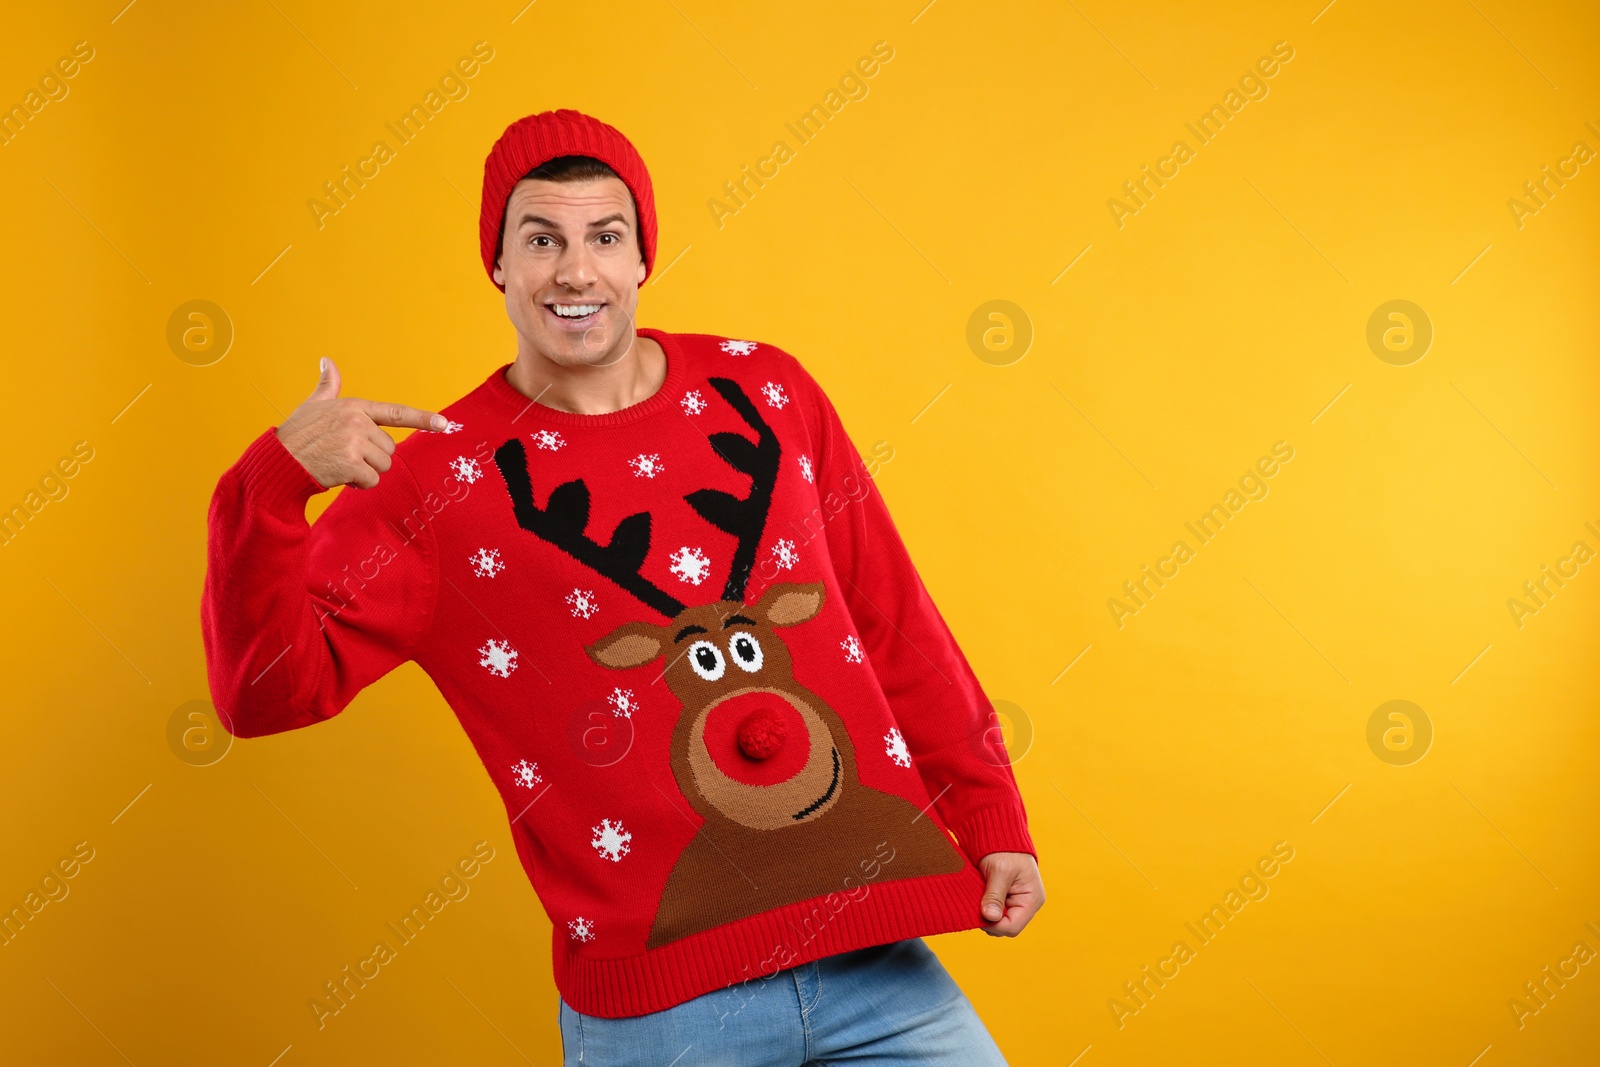 Photo of Happy man in hat showing his Christmas sweater on yellow background